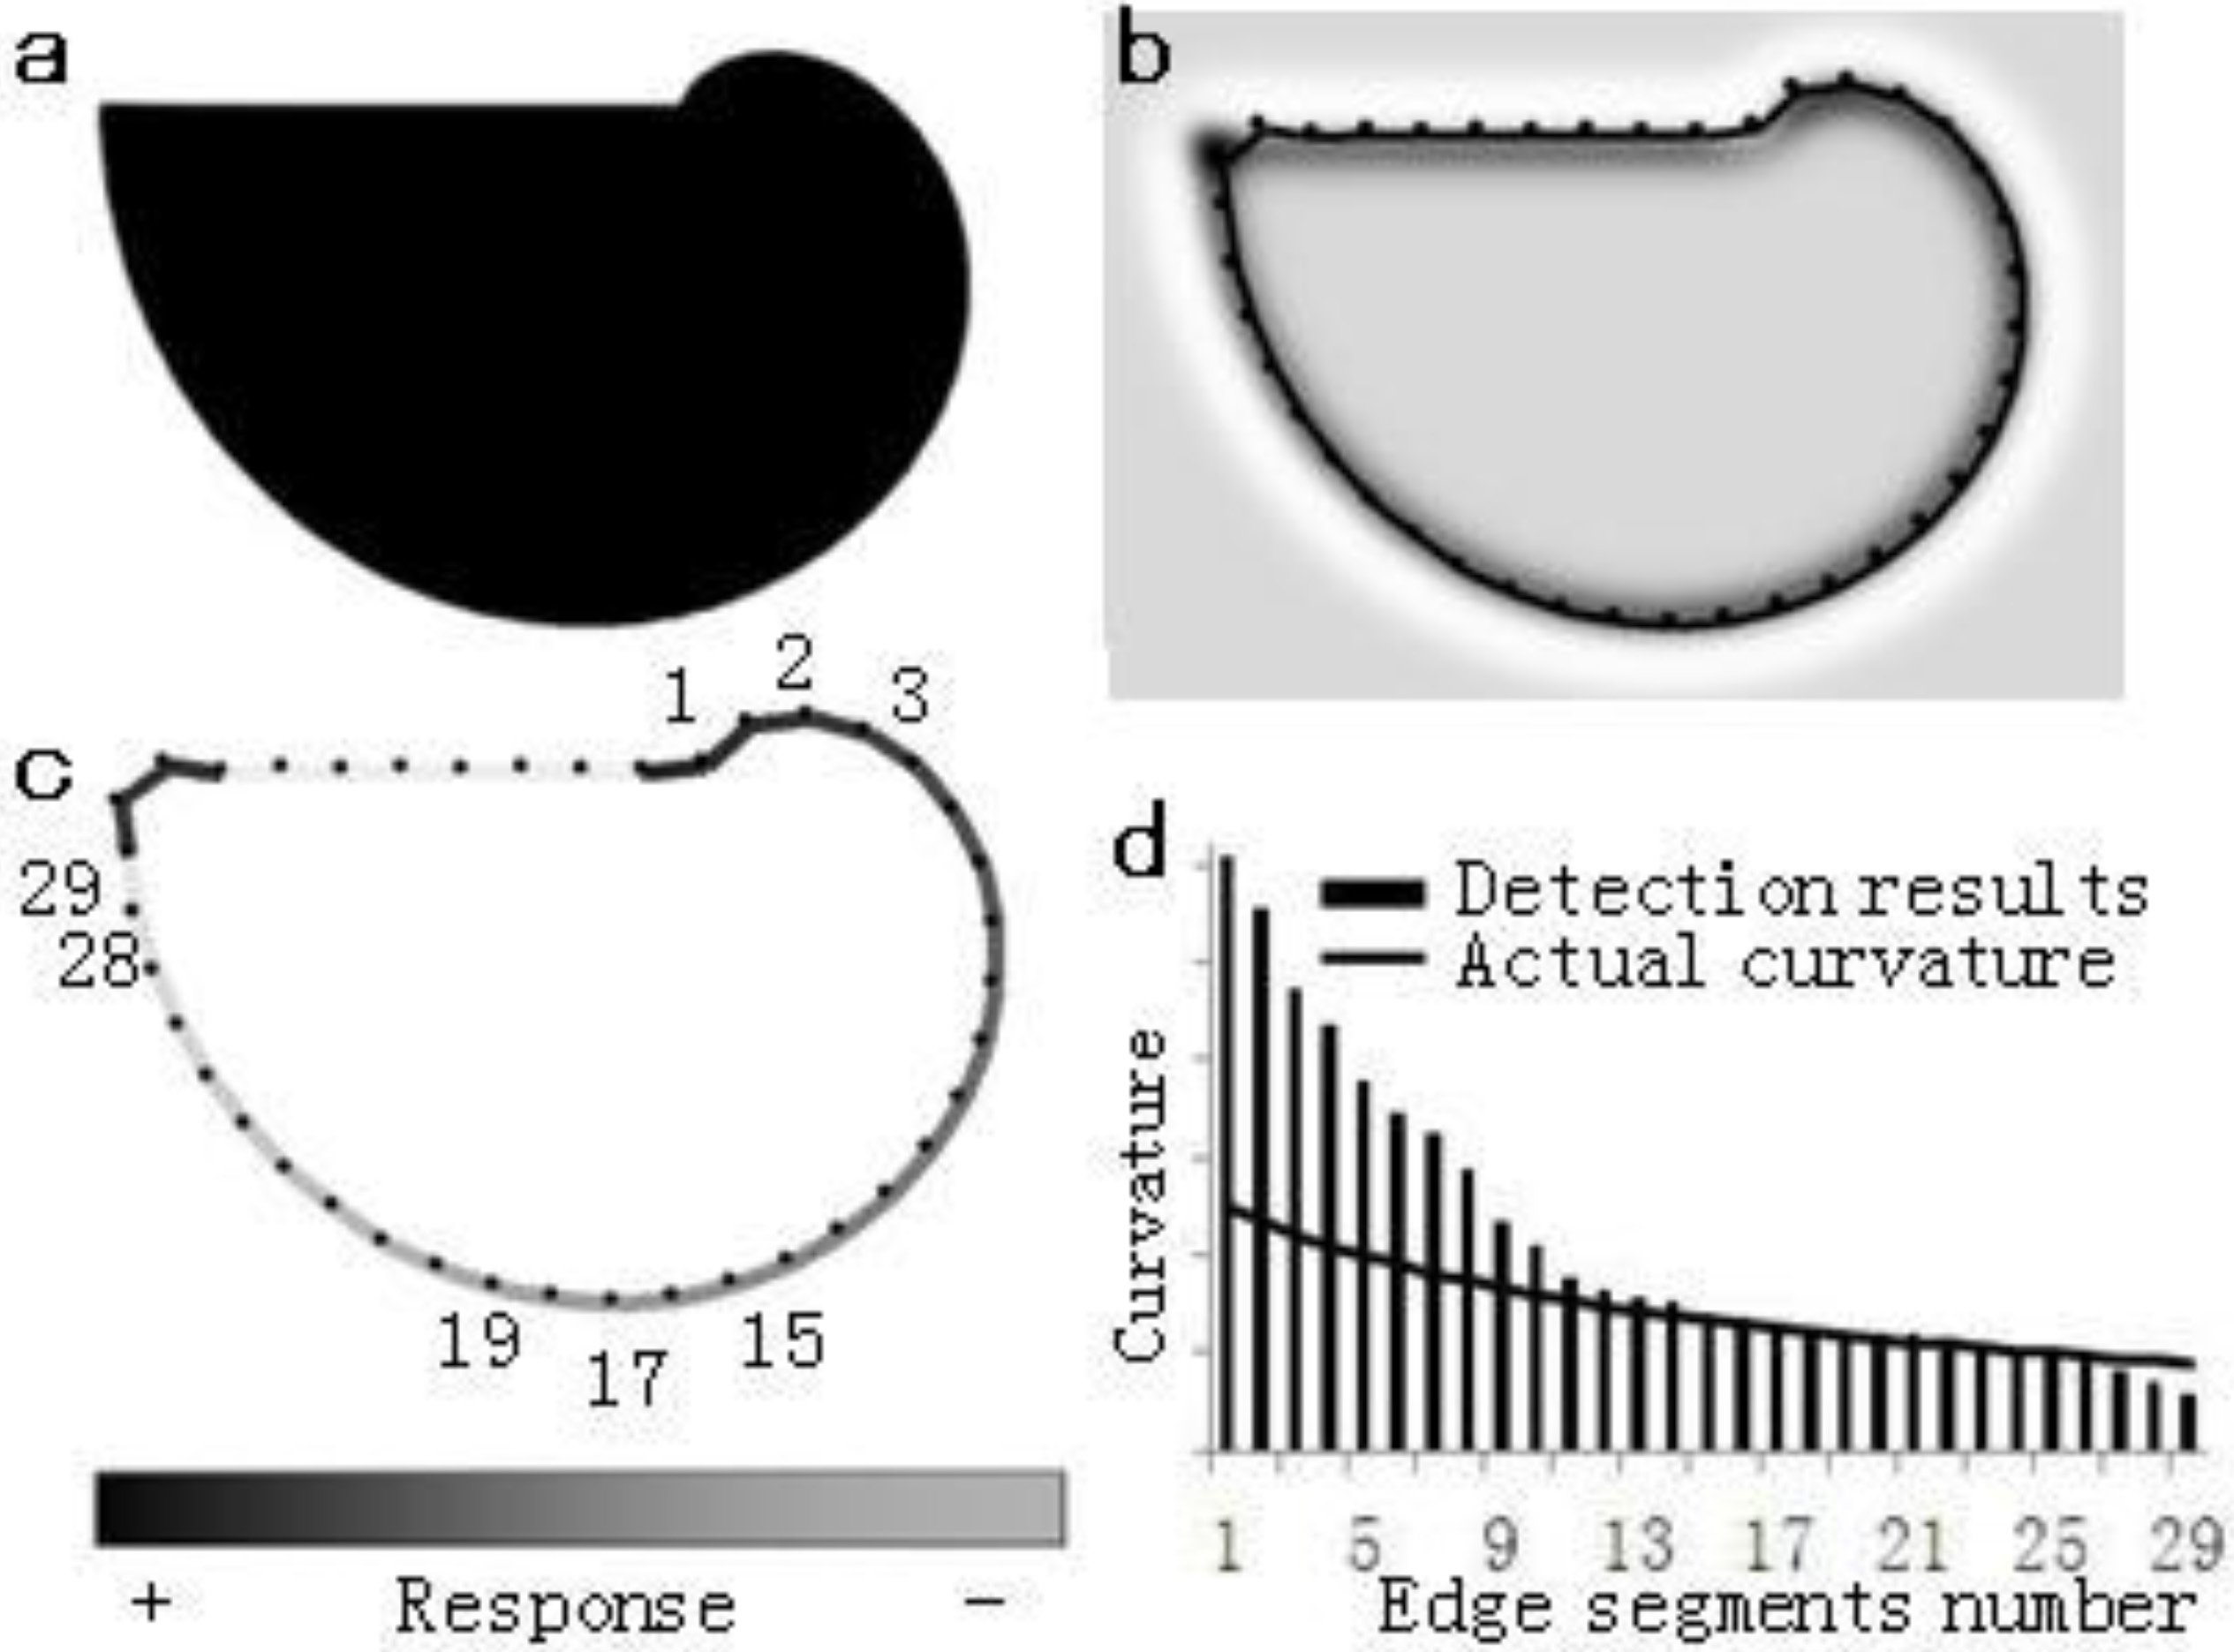 The results of curvature detection. (a) The Spiral pattern of gradient of curvature, with radius ranging from 40 to 320 pixels. (b) Contour detection results (spatial-frequency-tuned channels = 4.4 cycle/deg). (c) The response values of differential cells in each position of edge segments. (d) The results of curvature detection in each position of edge segments (CV3 receptive field).